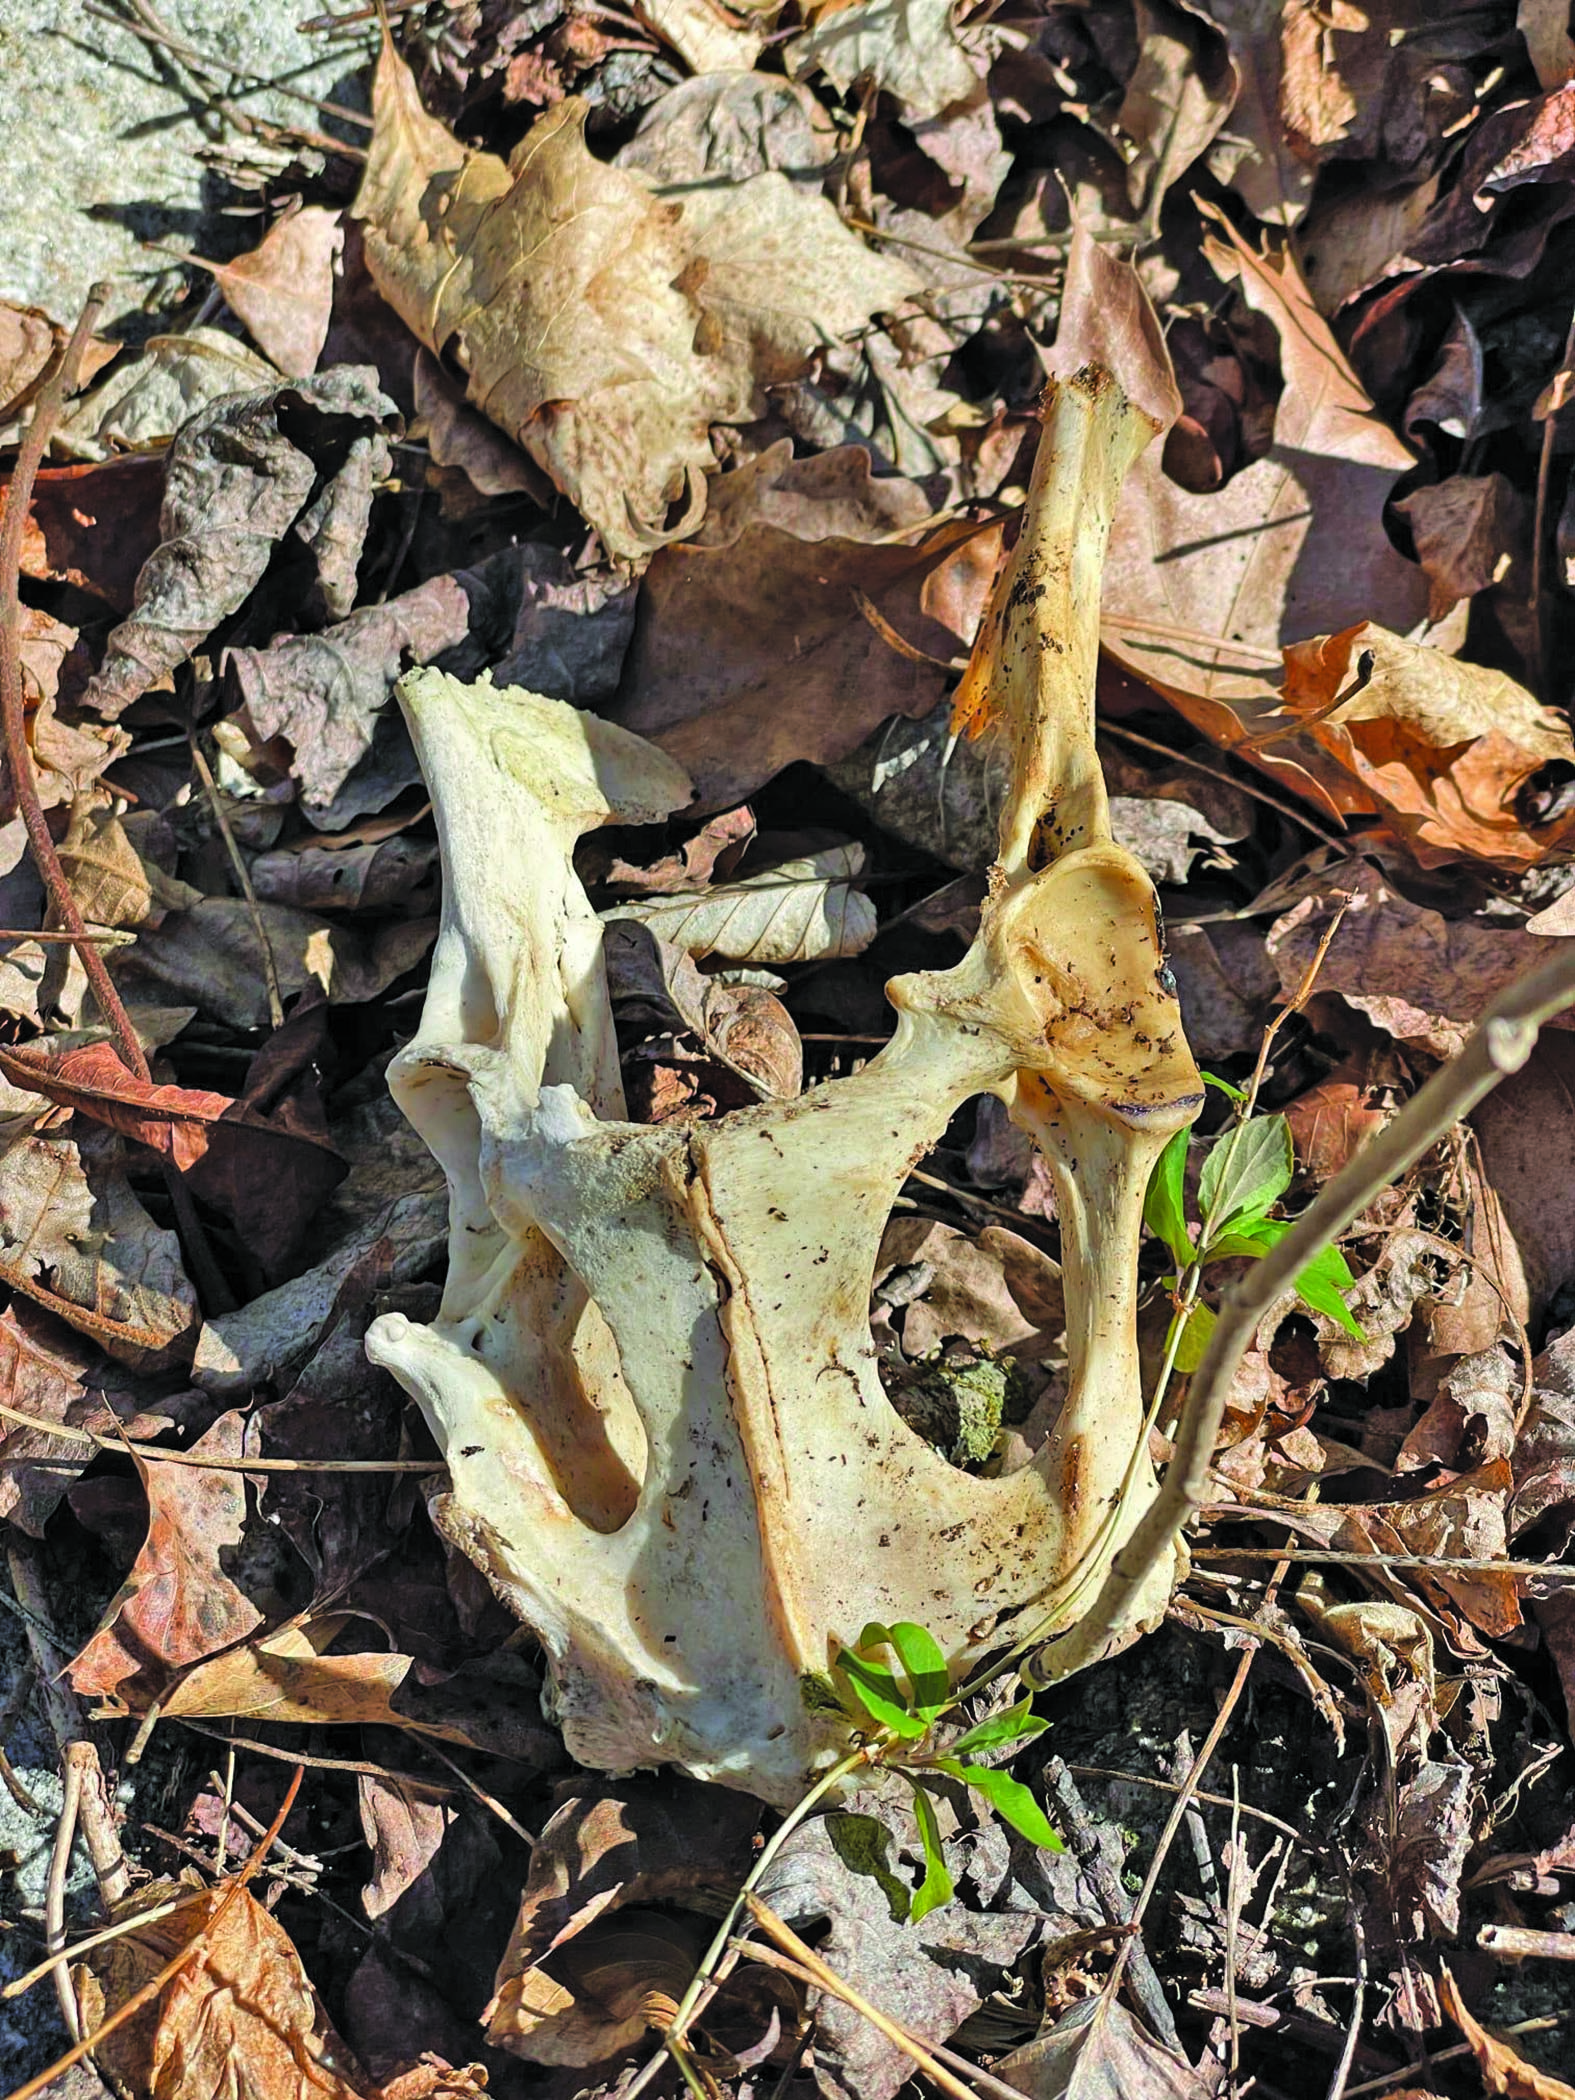 Photo by Eric Haggart A pelvis of an animal Eric Haggart found. 